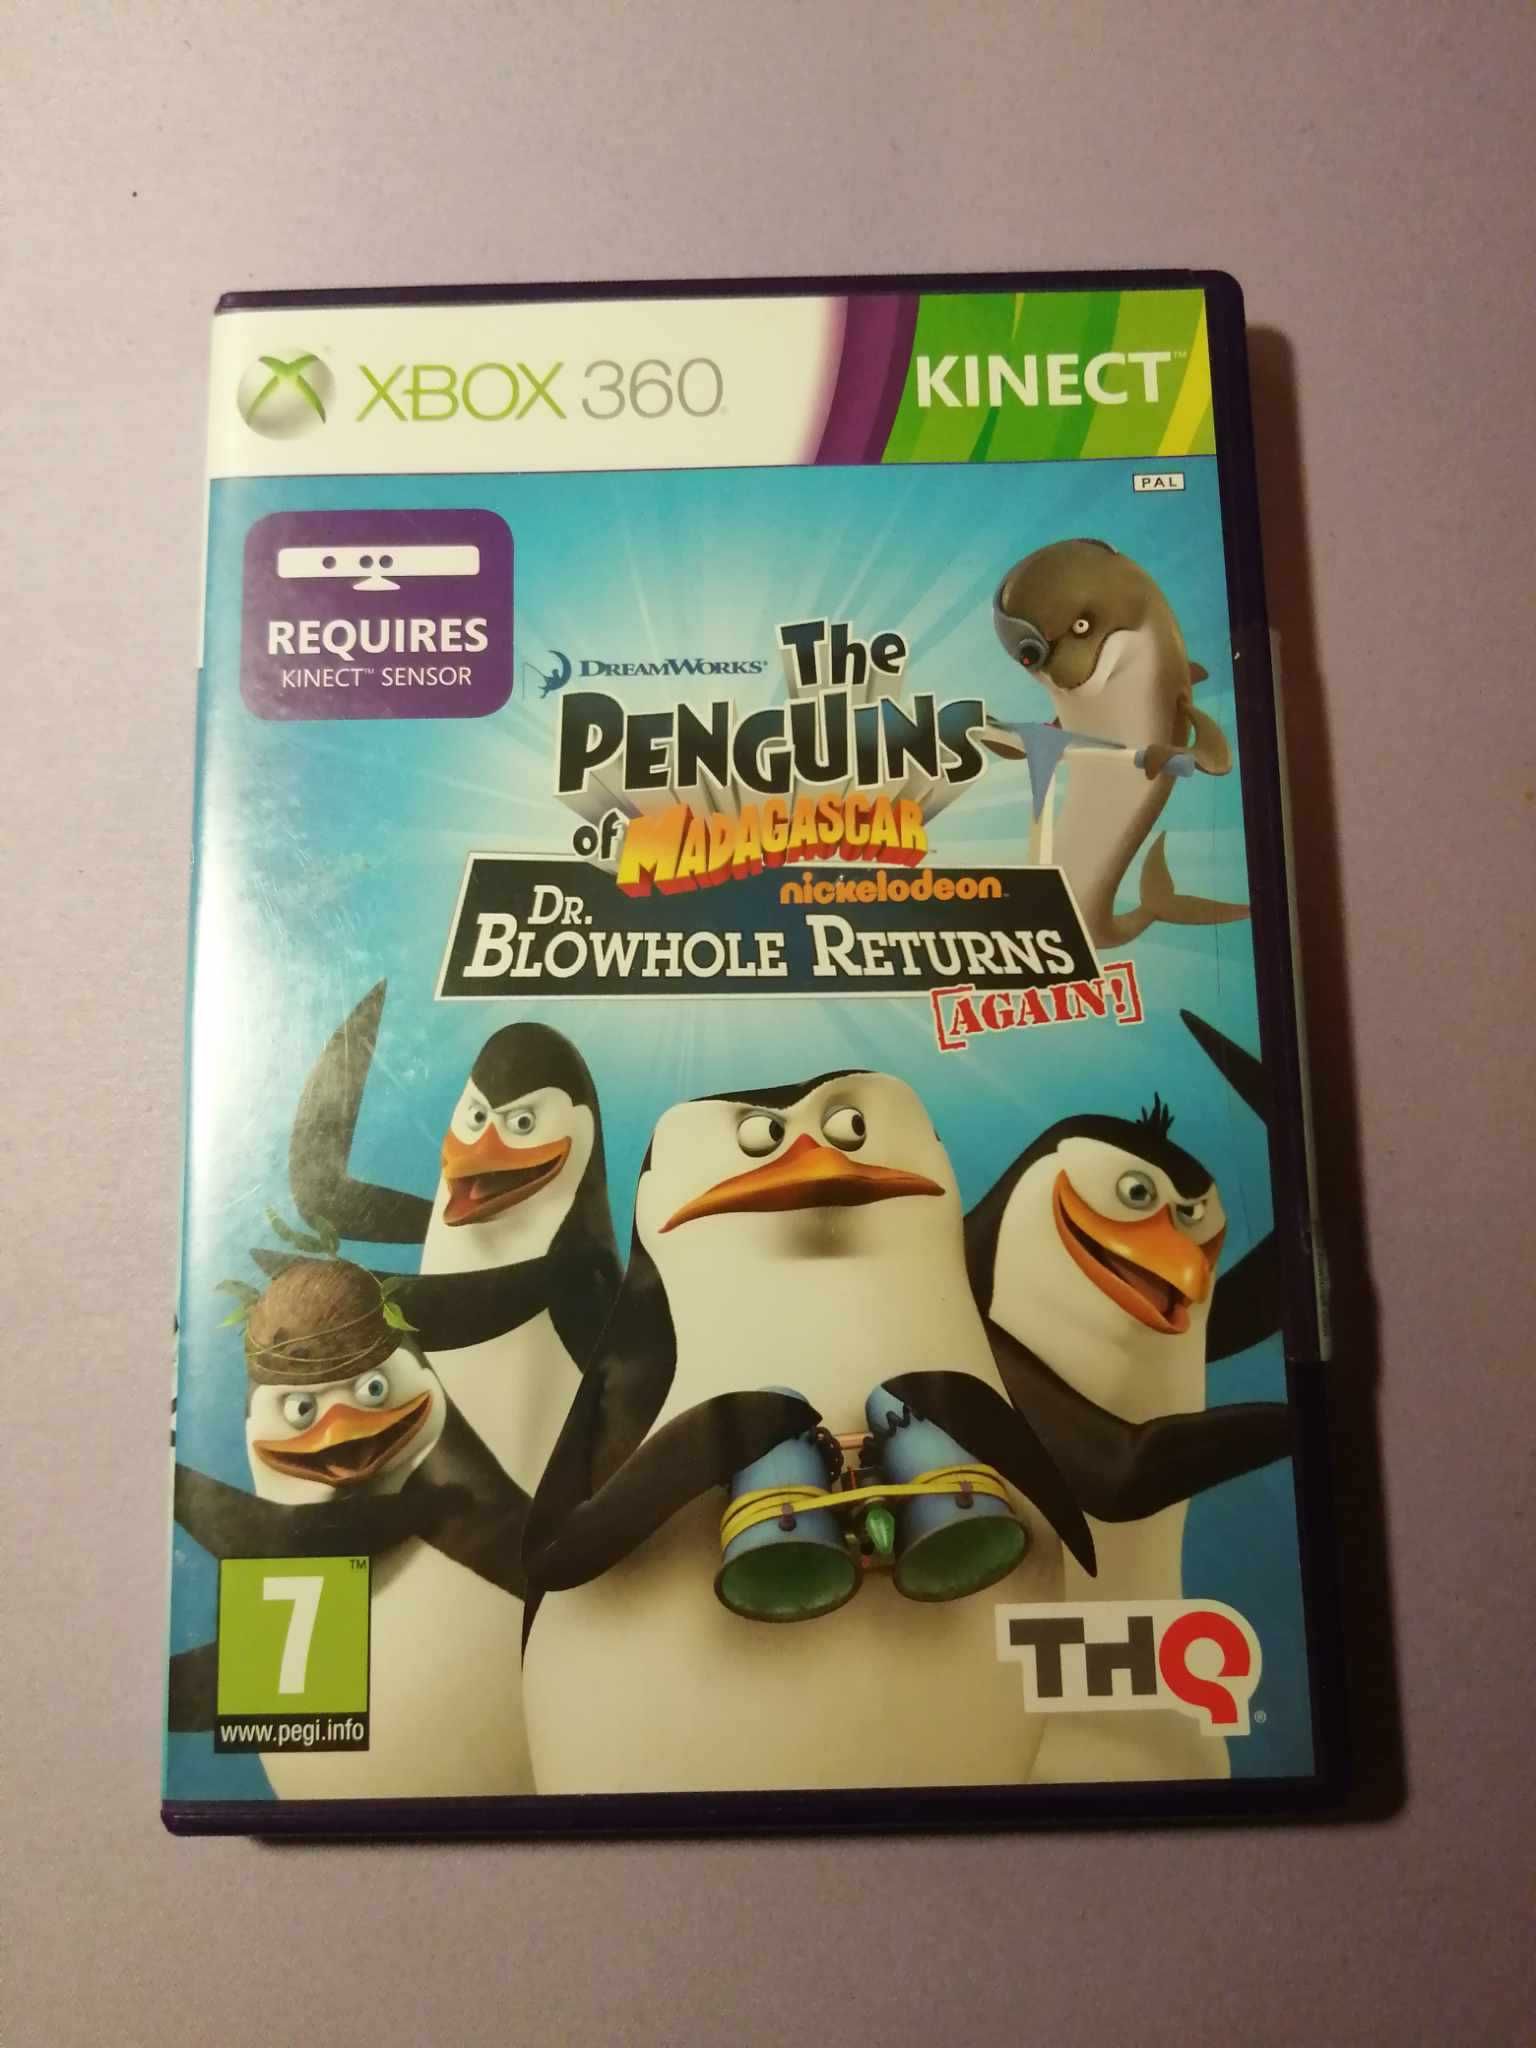 The Penguins of Madagascar: Dr.Blowhole Returns - Xbox 360 Kinect